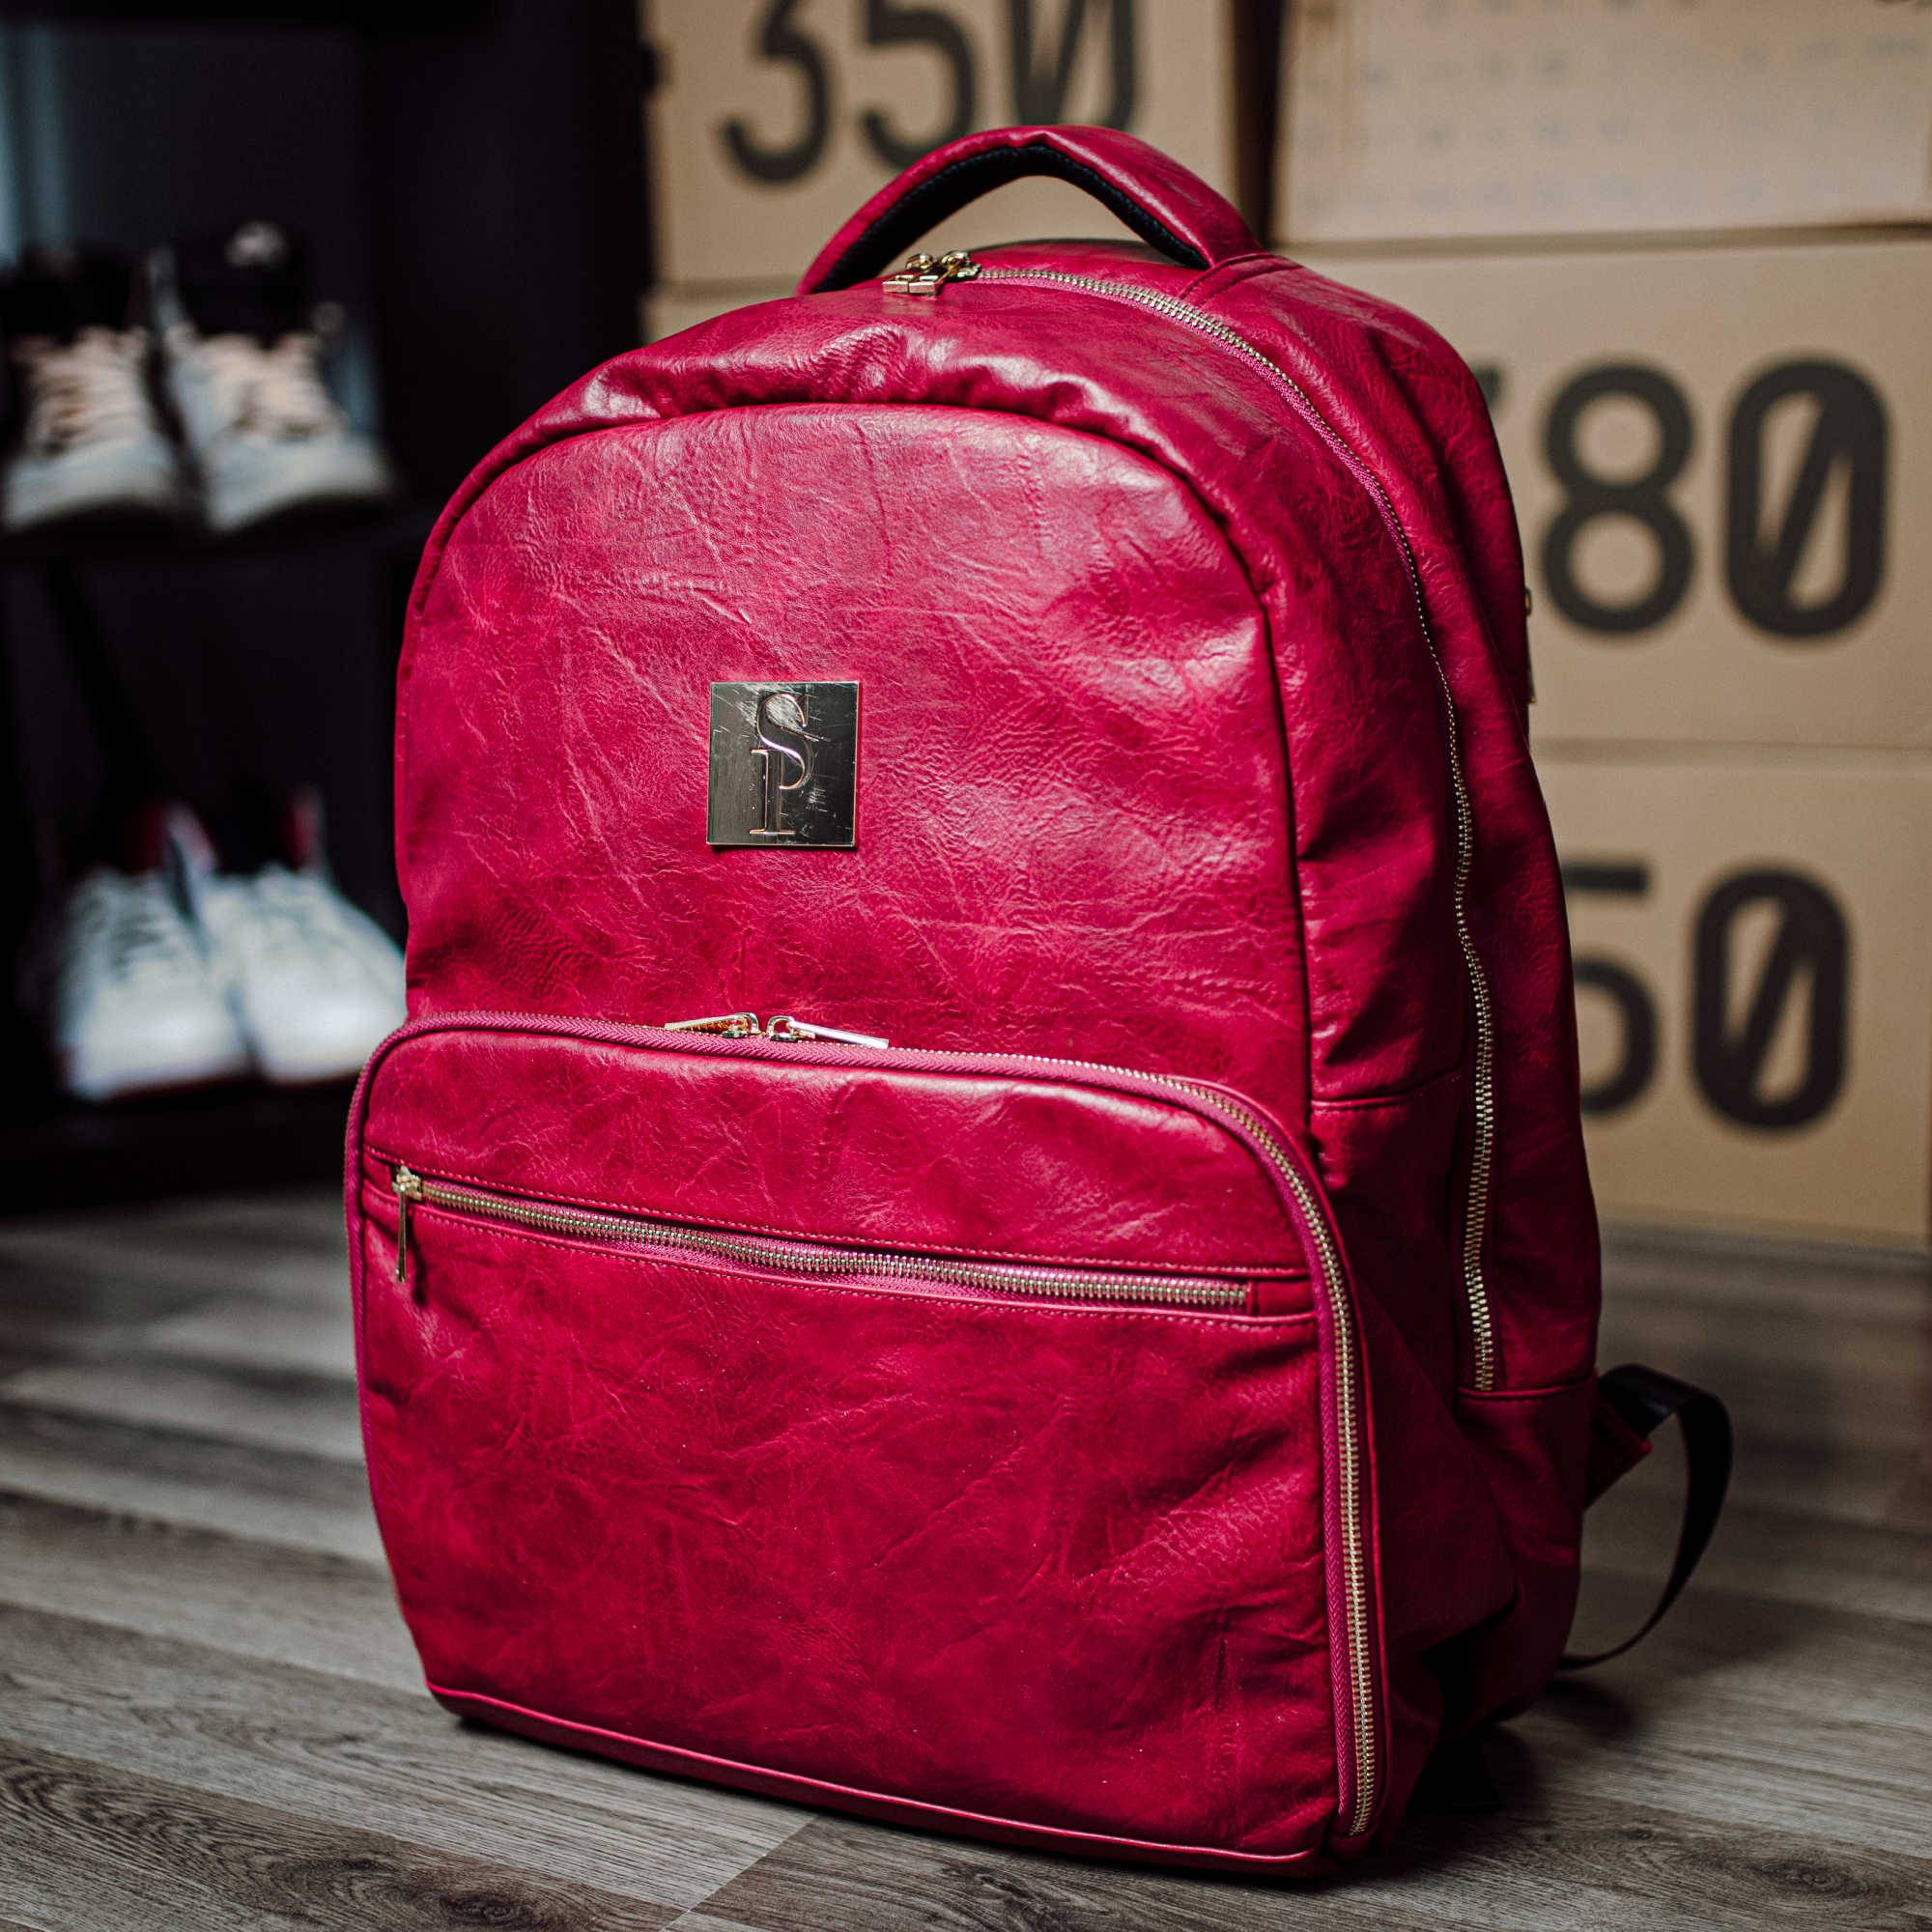 Maroon Tumbled Leather 2 Bag Set (Commuter and Duffle) - Sole Premise